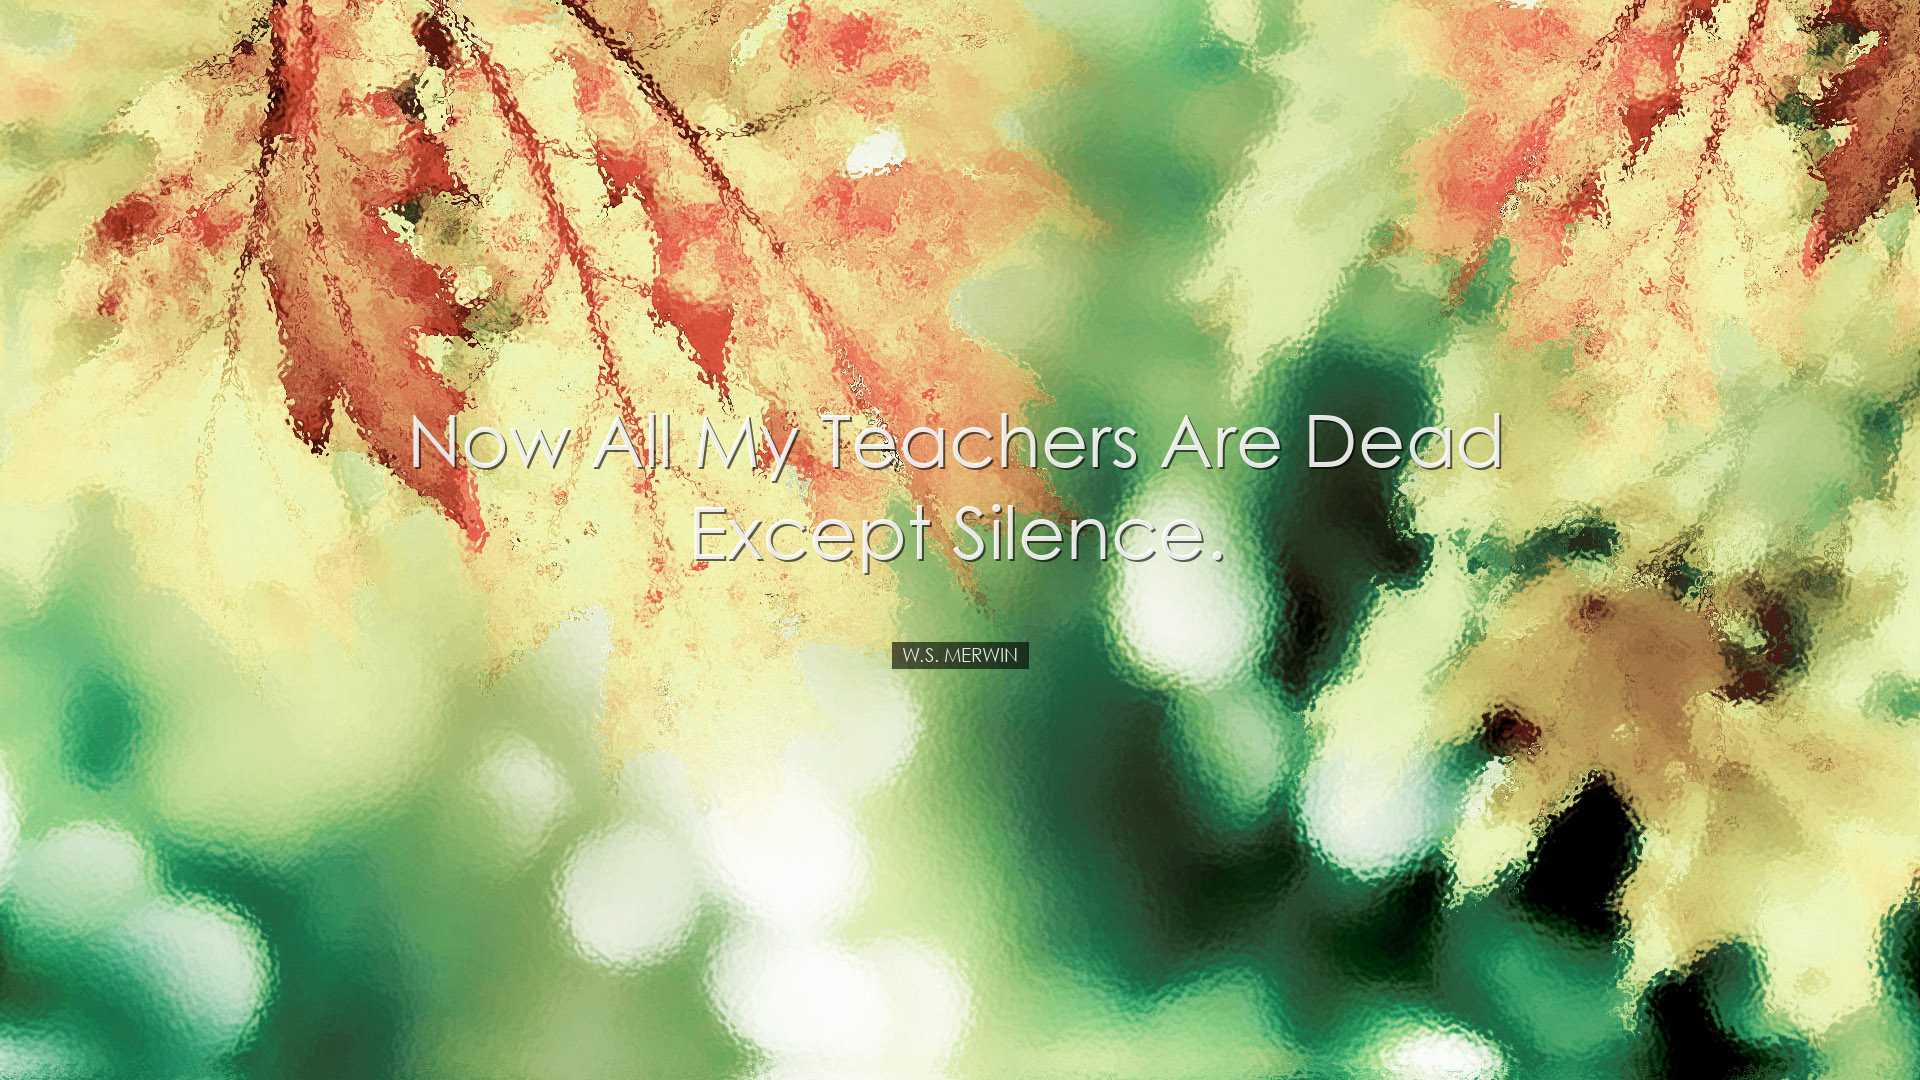 Now all my teachers are dead except silence. - W.S. Merwin